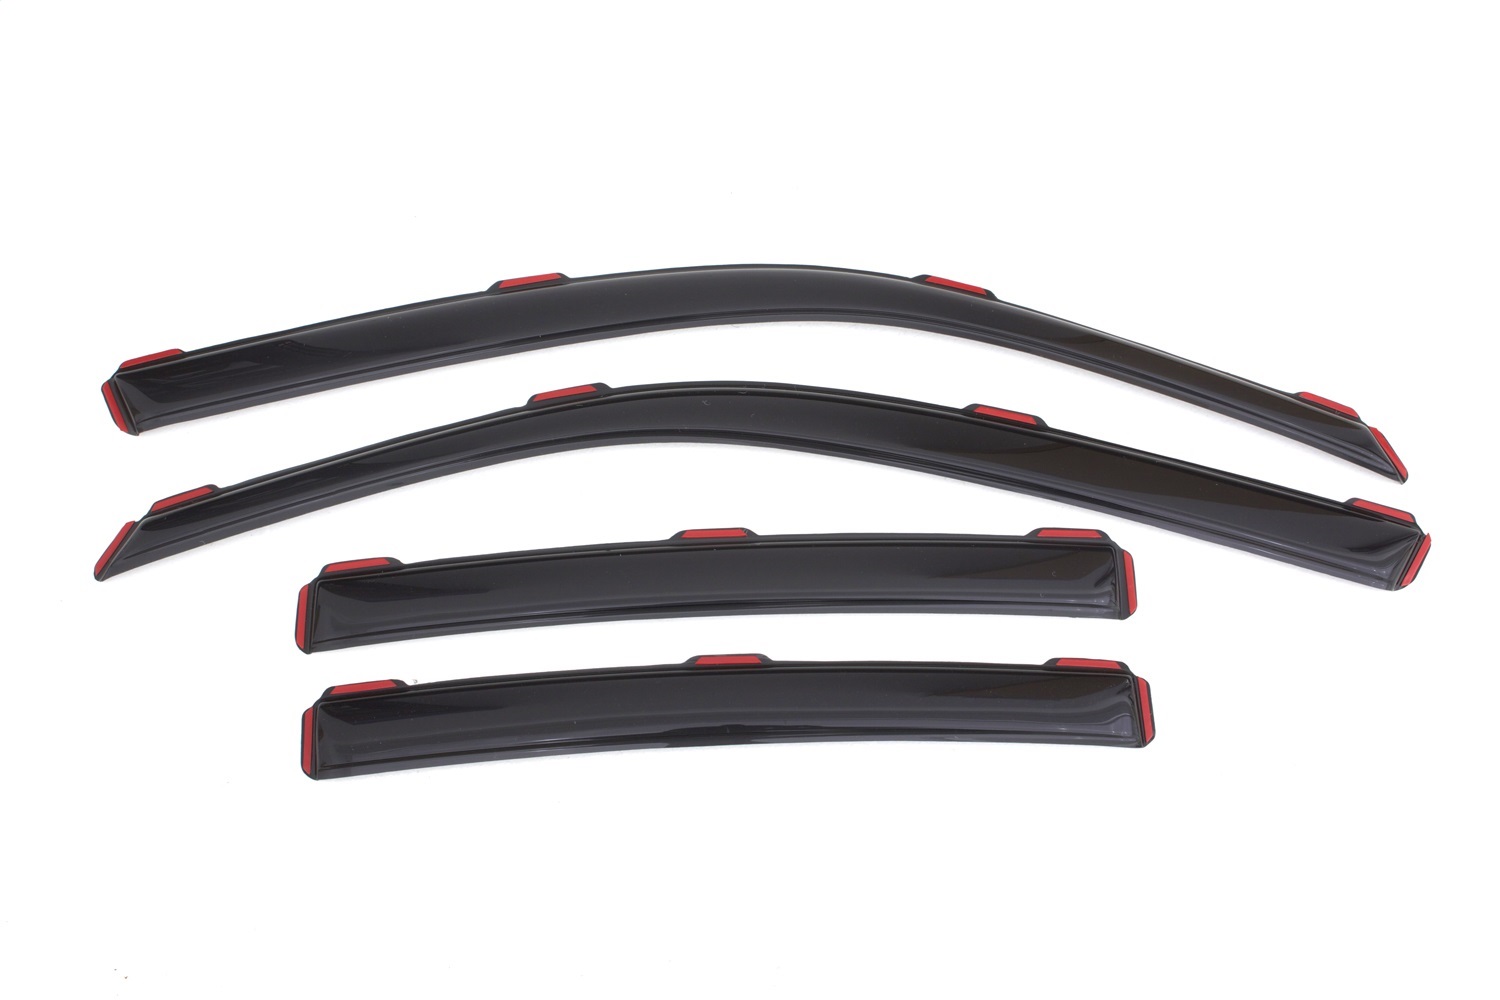 Auto Ventshade Auto Ventshade 194313 Ventvisor; In-Channel Deflector 4 pc. Fits 11-15 Charger